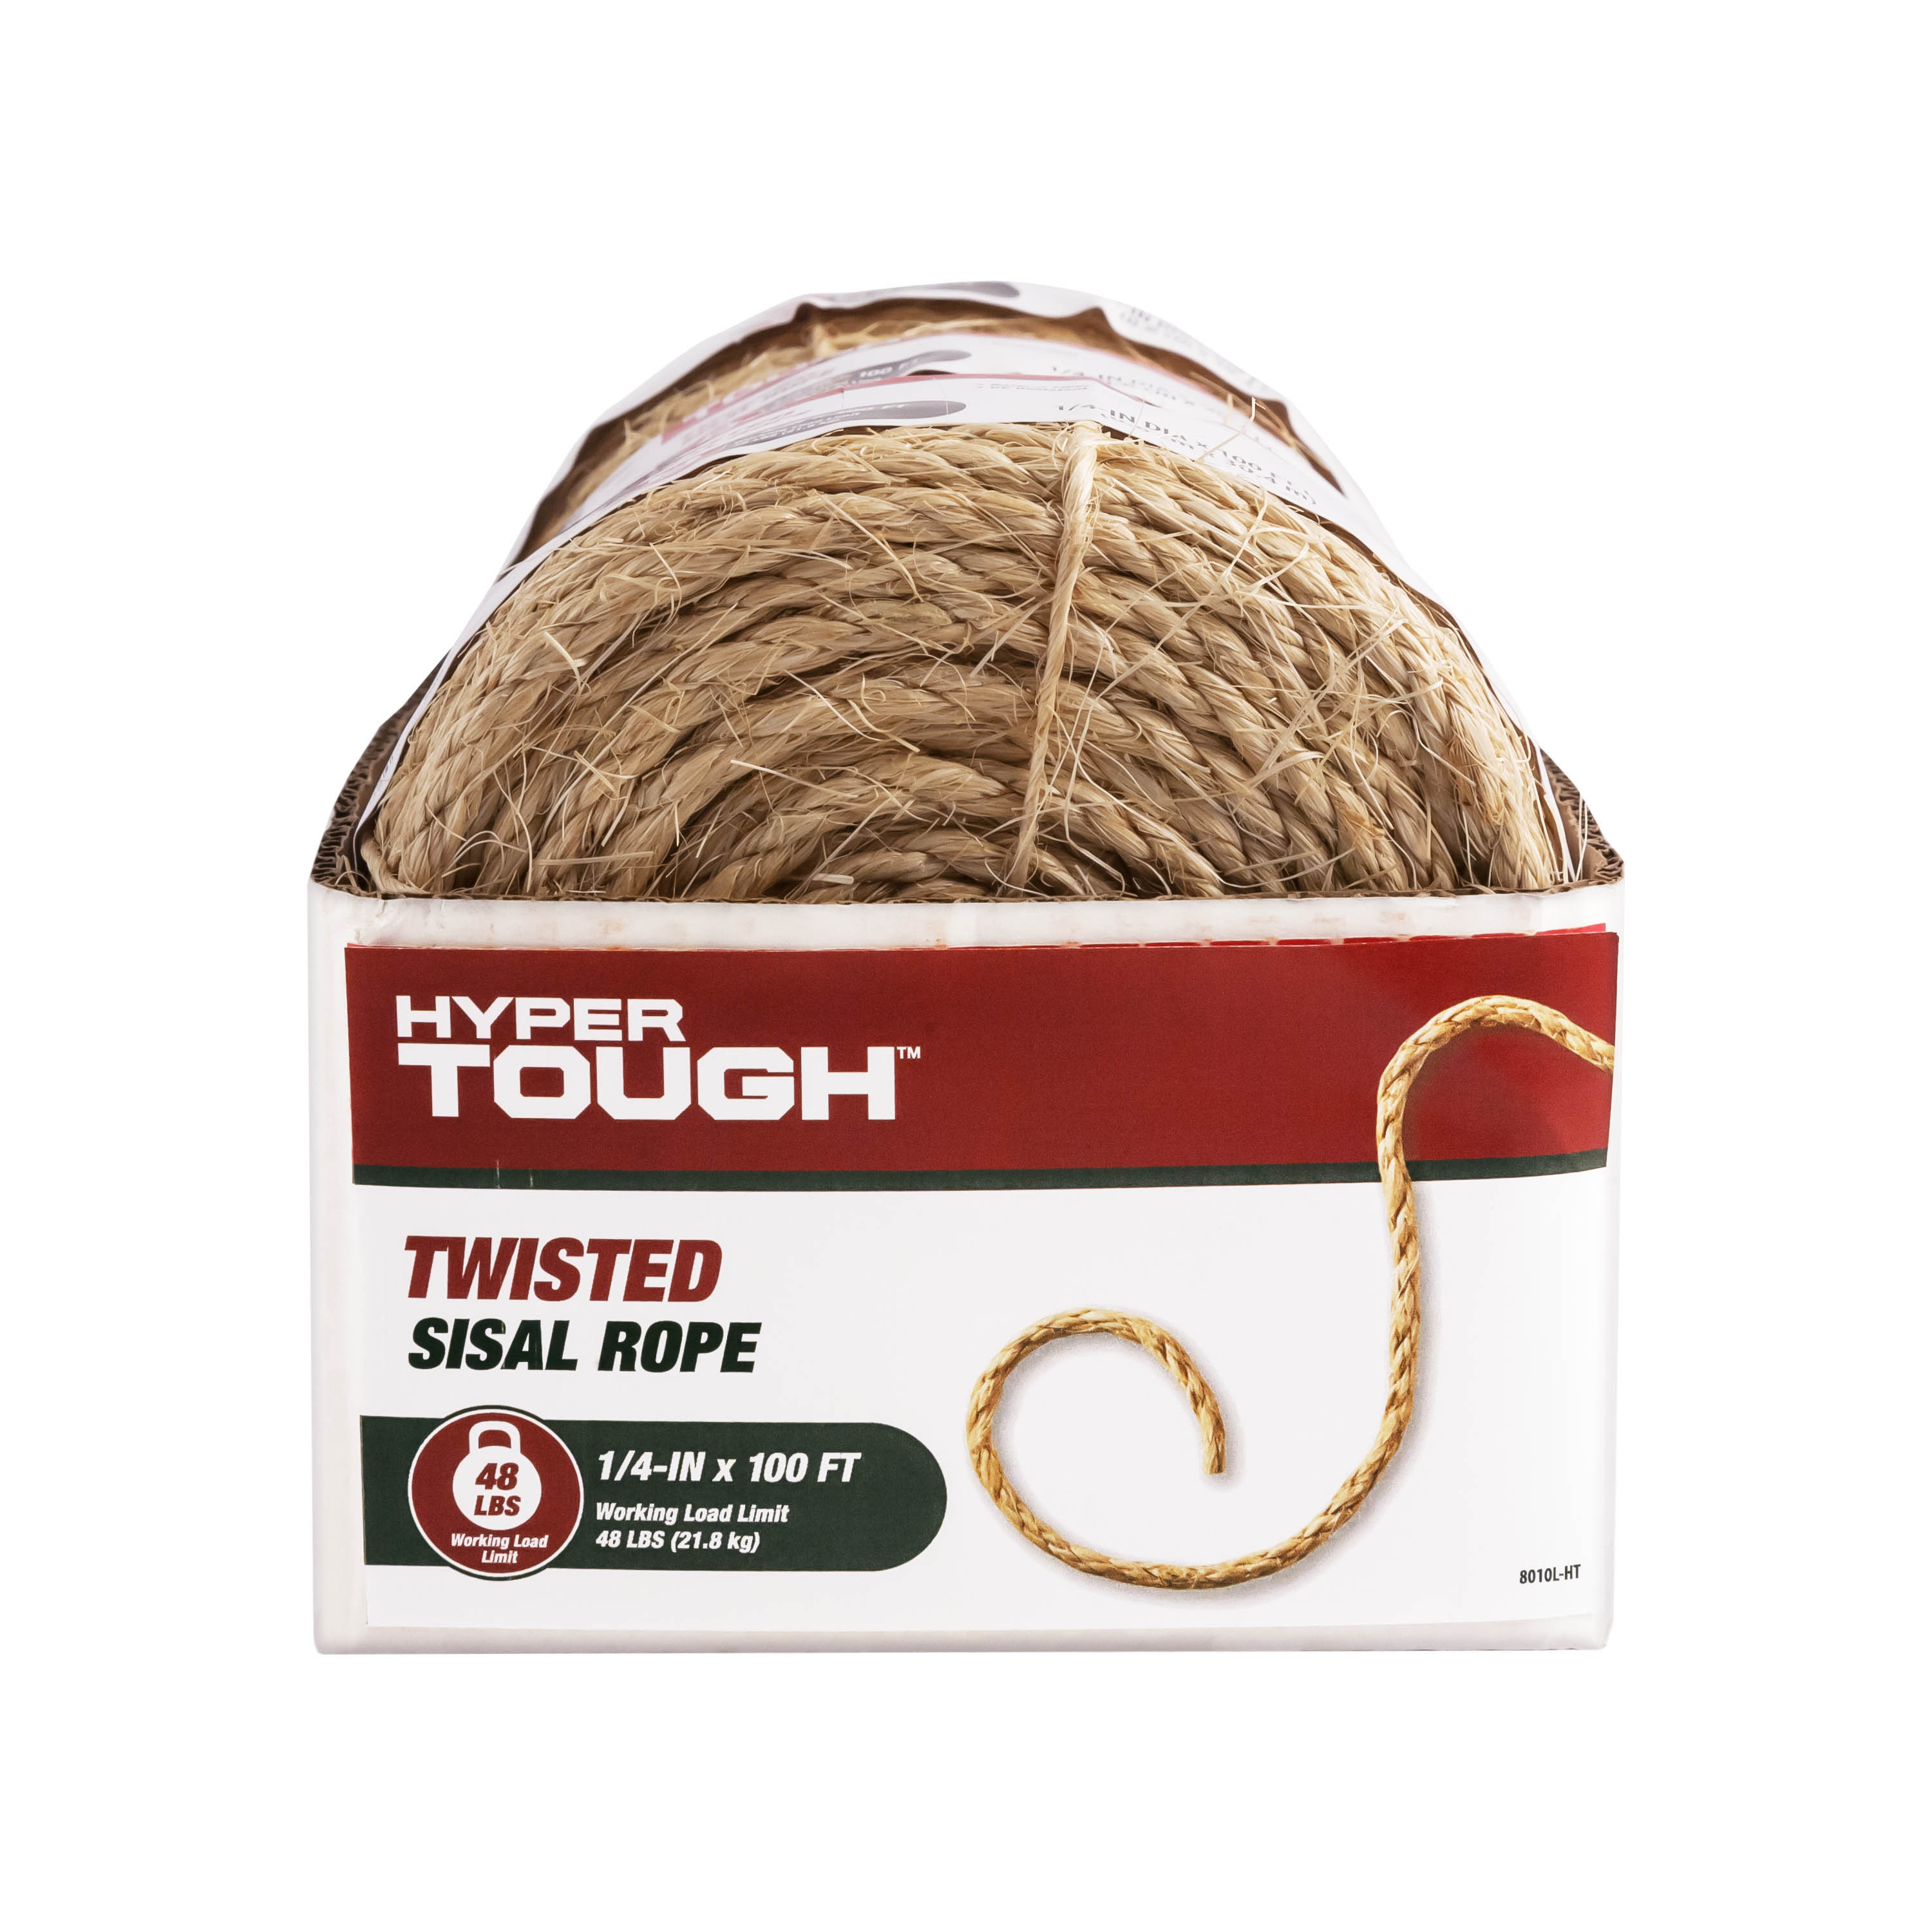 Hyper Tough 1/4" x 100' Sisal Twisted Rope, Beige - image 5 of 6